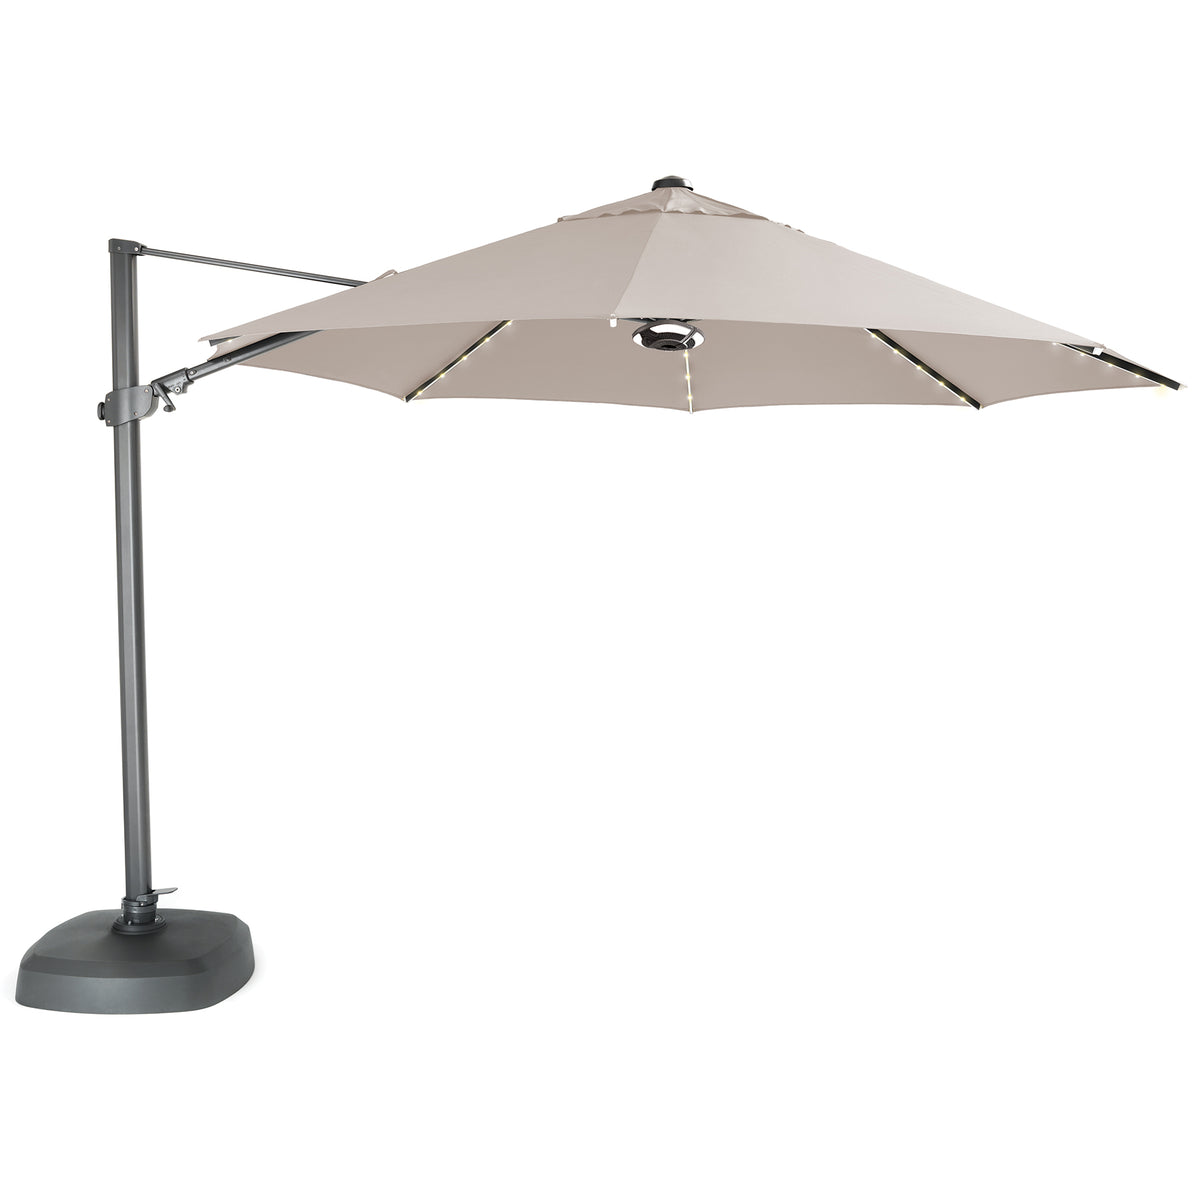 Kettler 3.5m Stone Free Arm Cantilever Parasol with LED Lights and Bluetooth Speaker